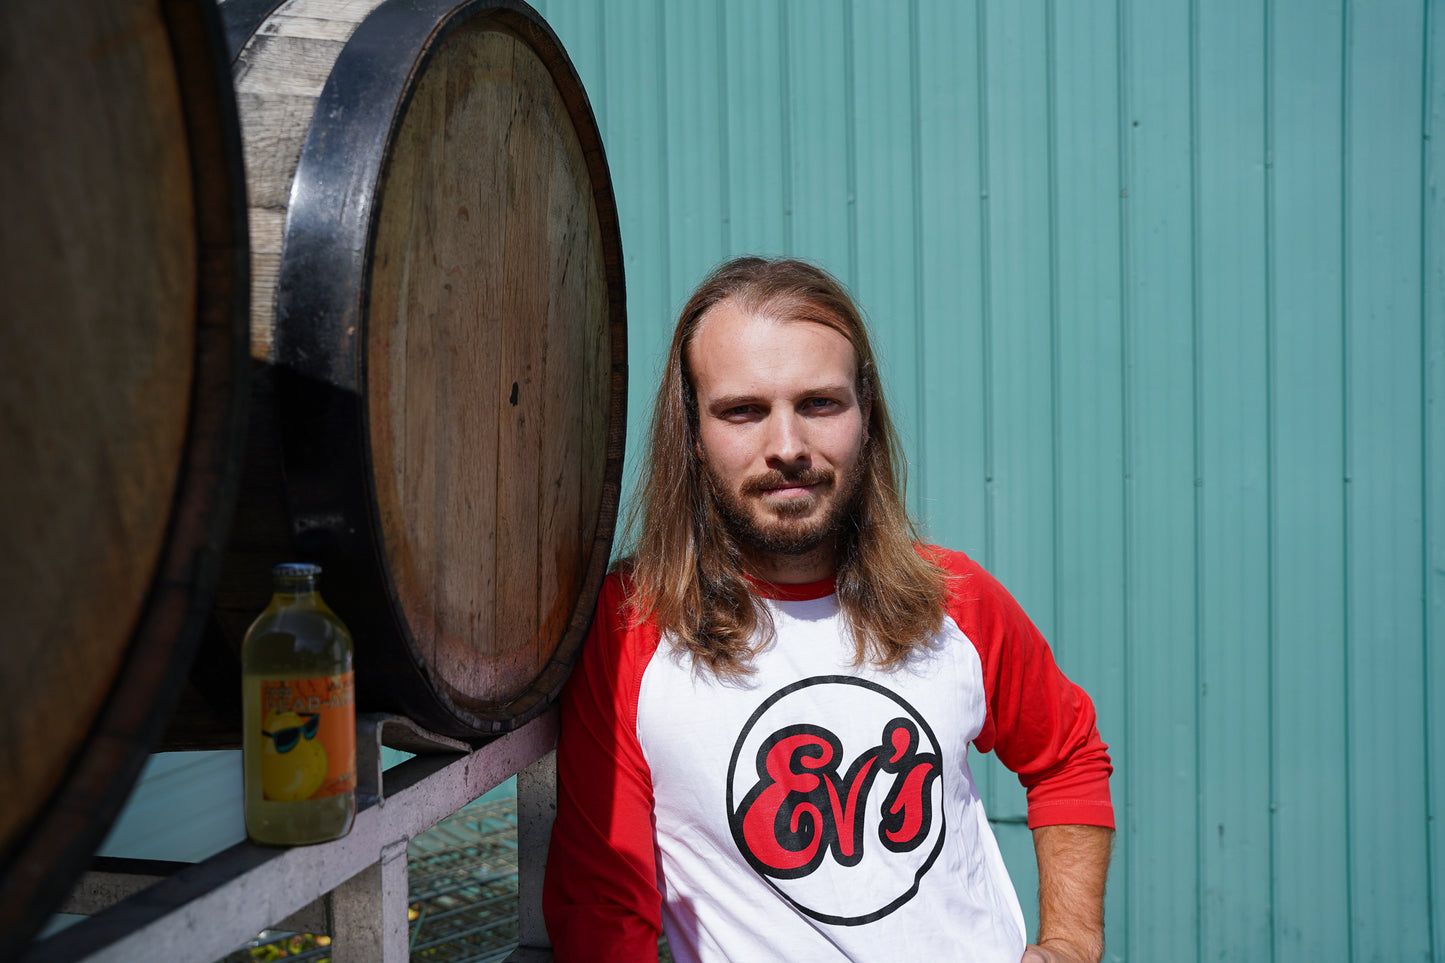 Mitch with Ev's Eclectics Baseball Tee with barrels